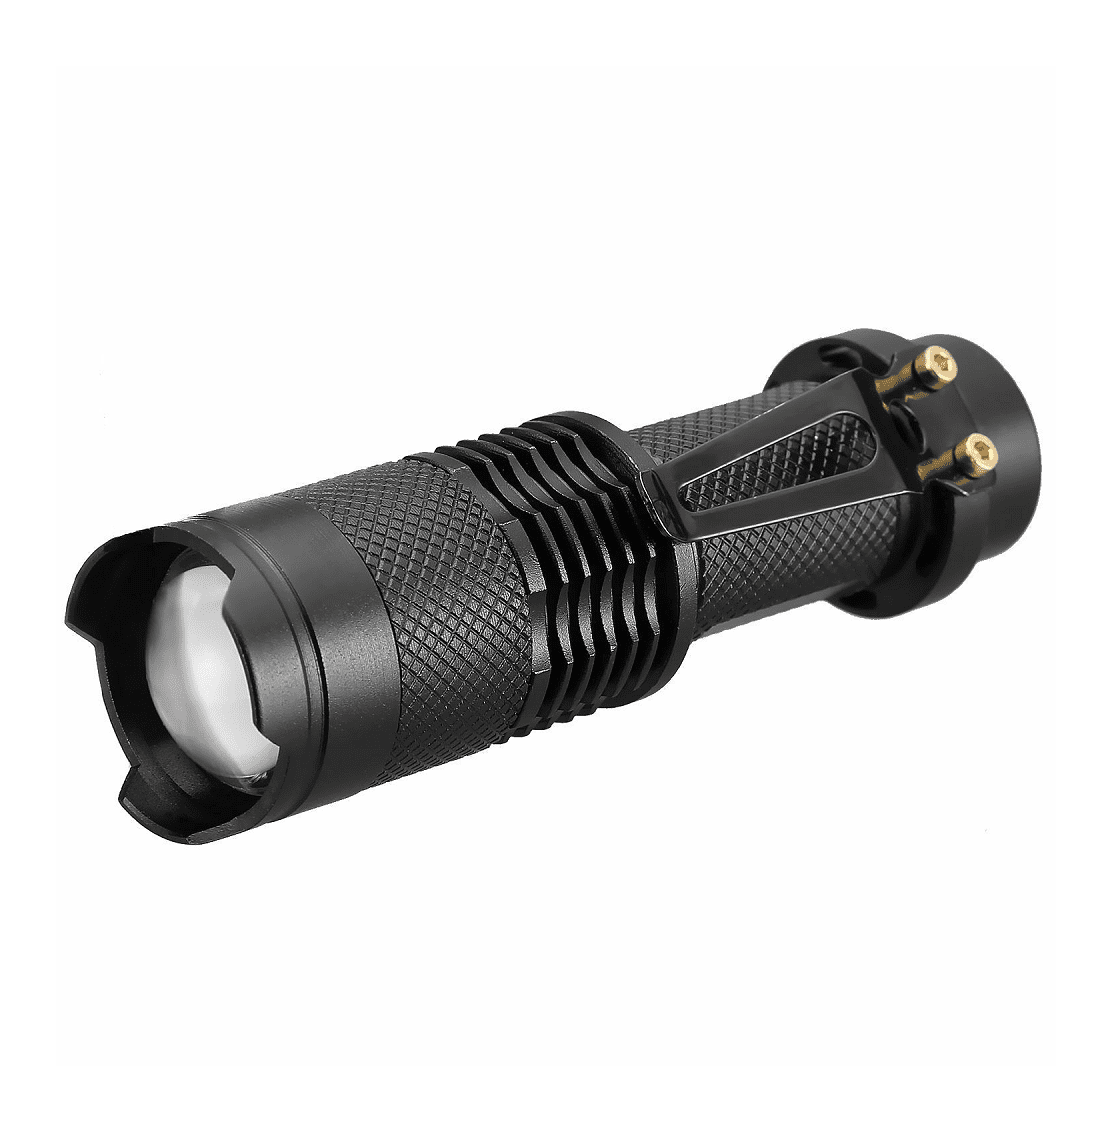 UltraFire Hiking 50000LM T6 Zoomable LED Flashlight Torch+Battery+Charger Case 